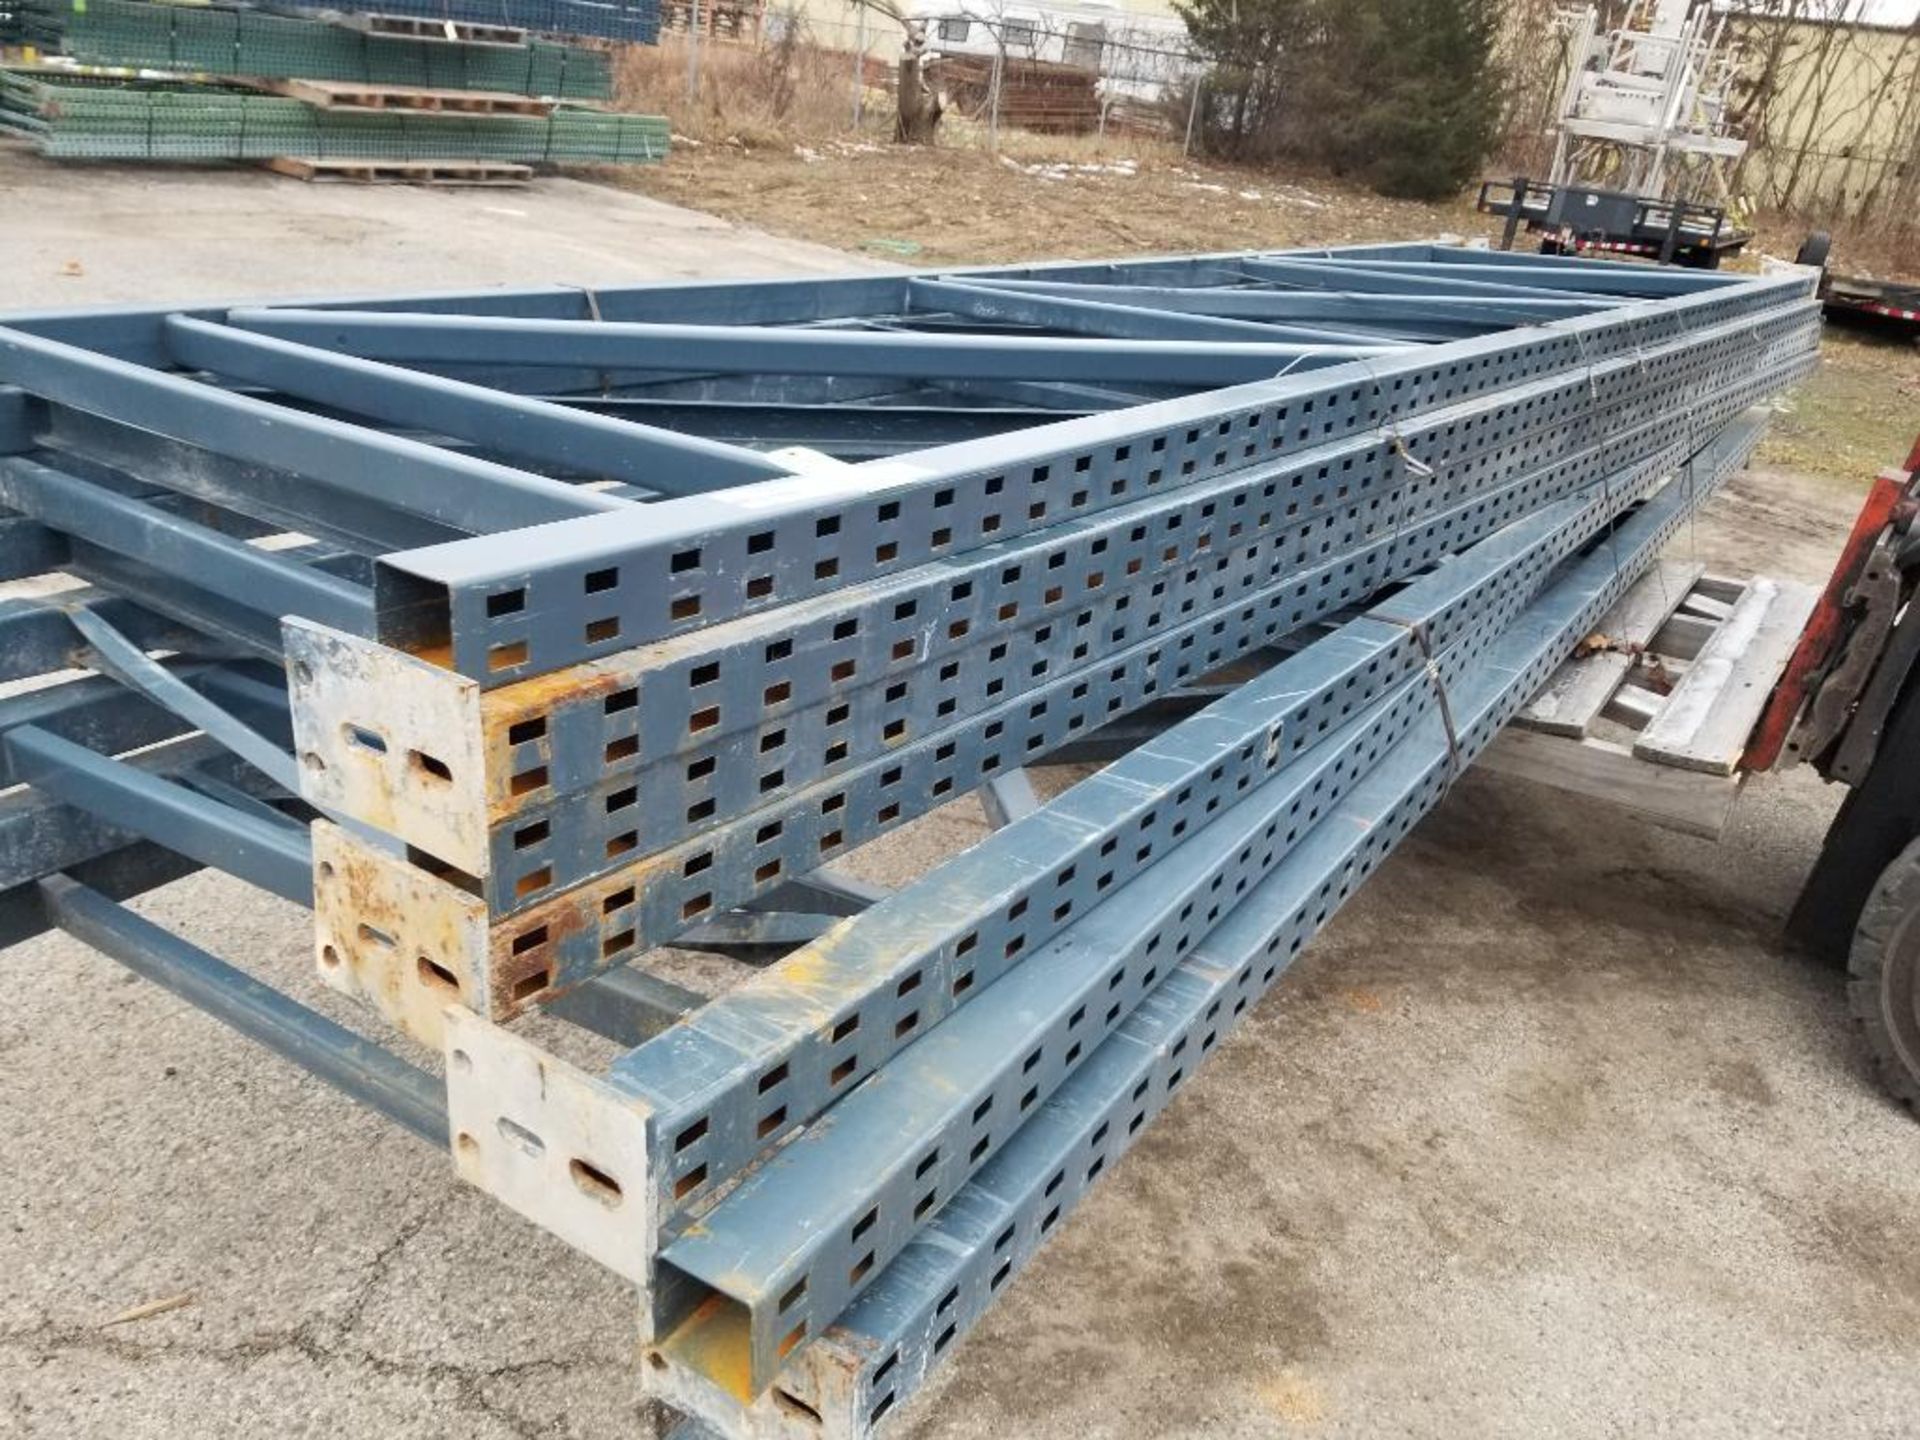 Qty 8 - Pallet racking uprights. 210in tall x 49in wide.